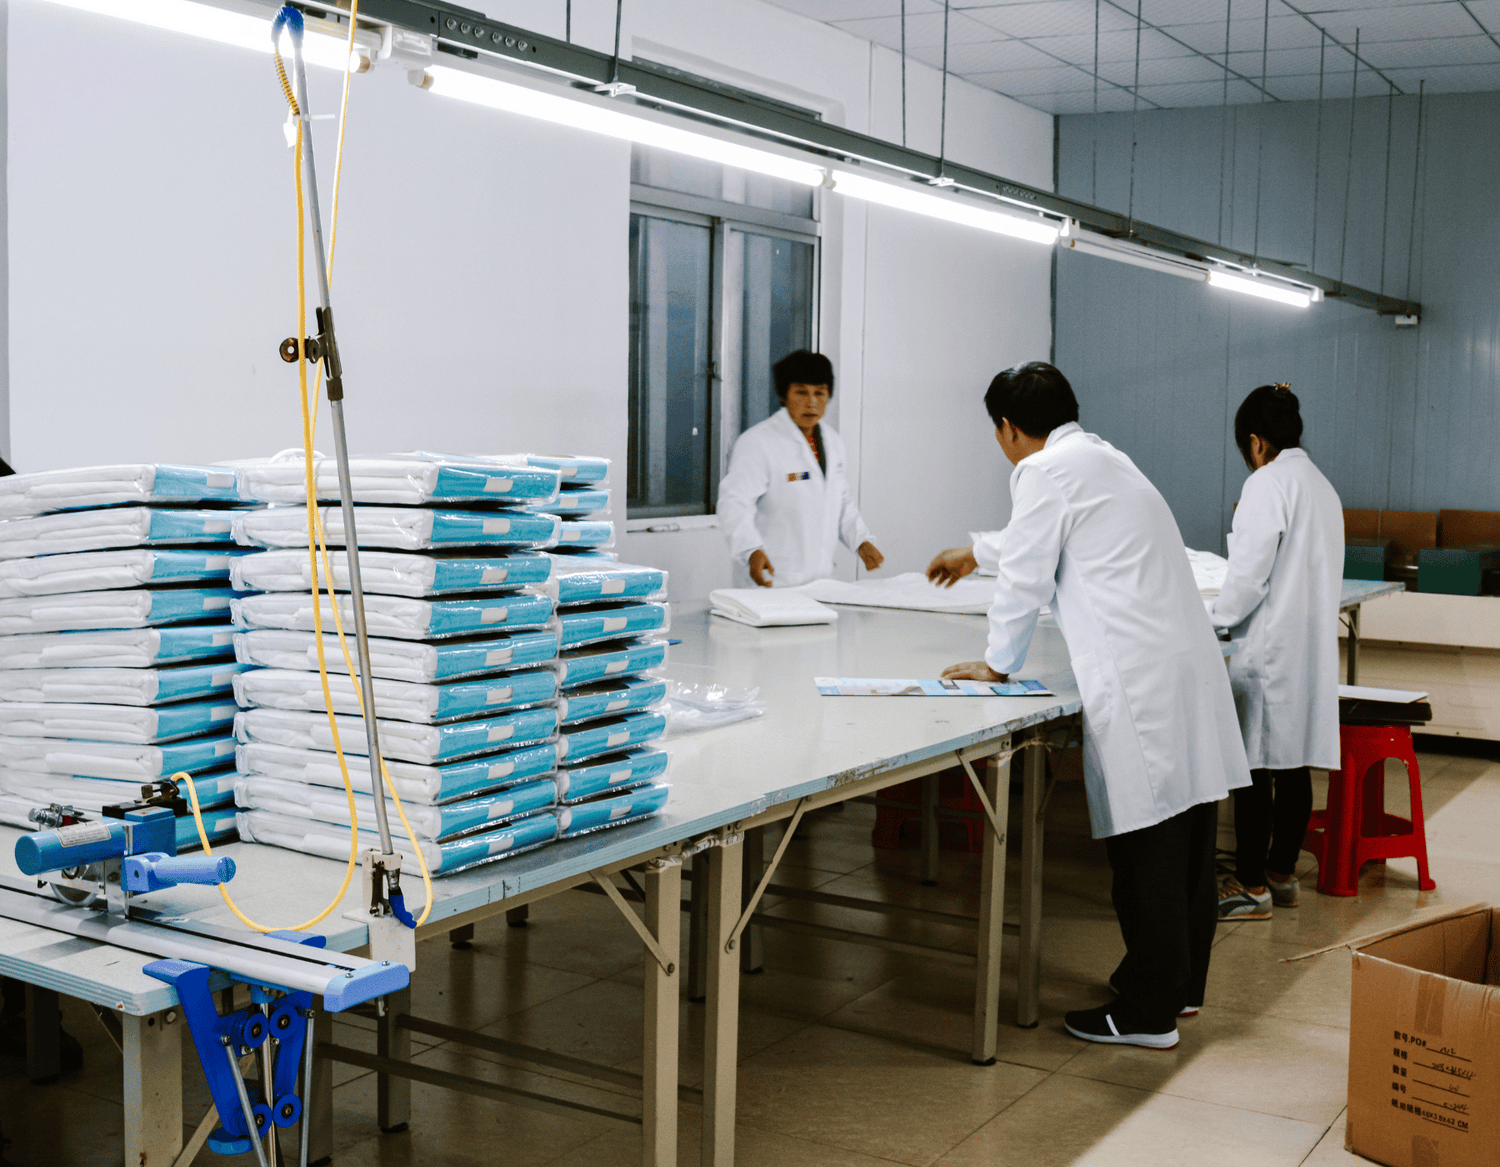 Workers in factory folding Brolly Sheets on long white table.  In the foreground there are 5 stacks of Brolly Sheets waiting to be put in to cartons.